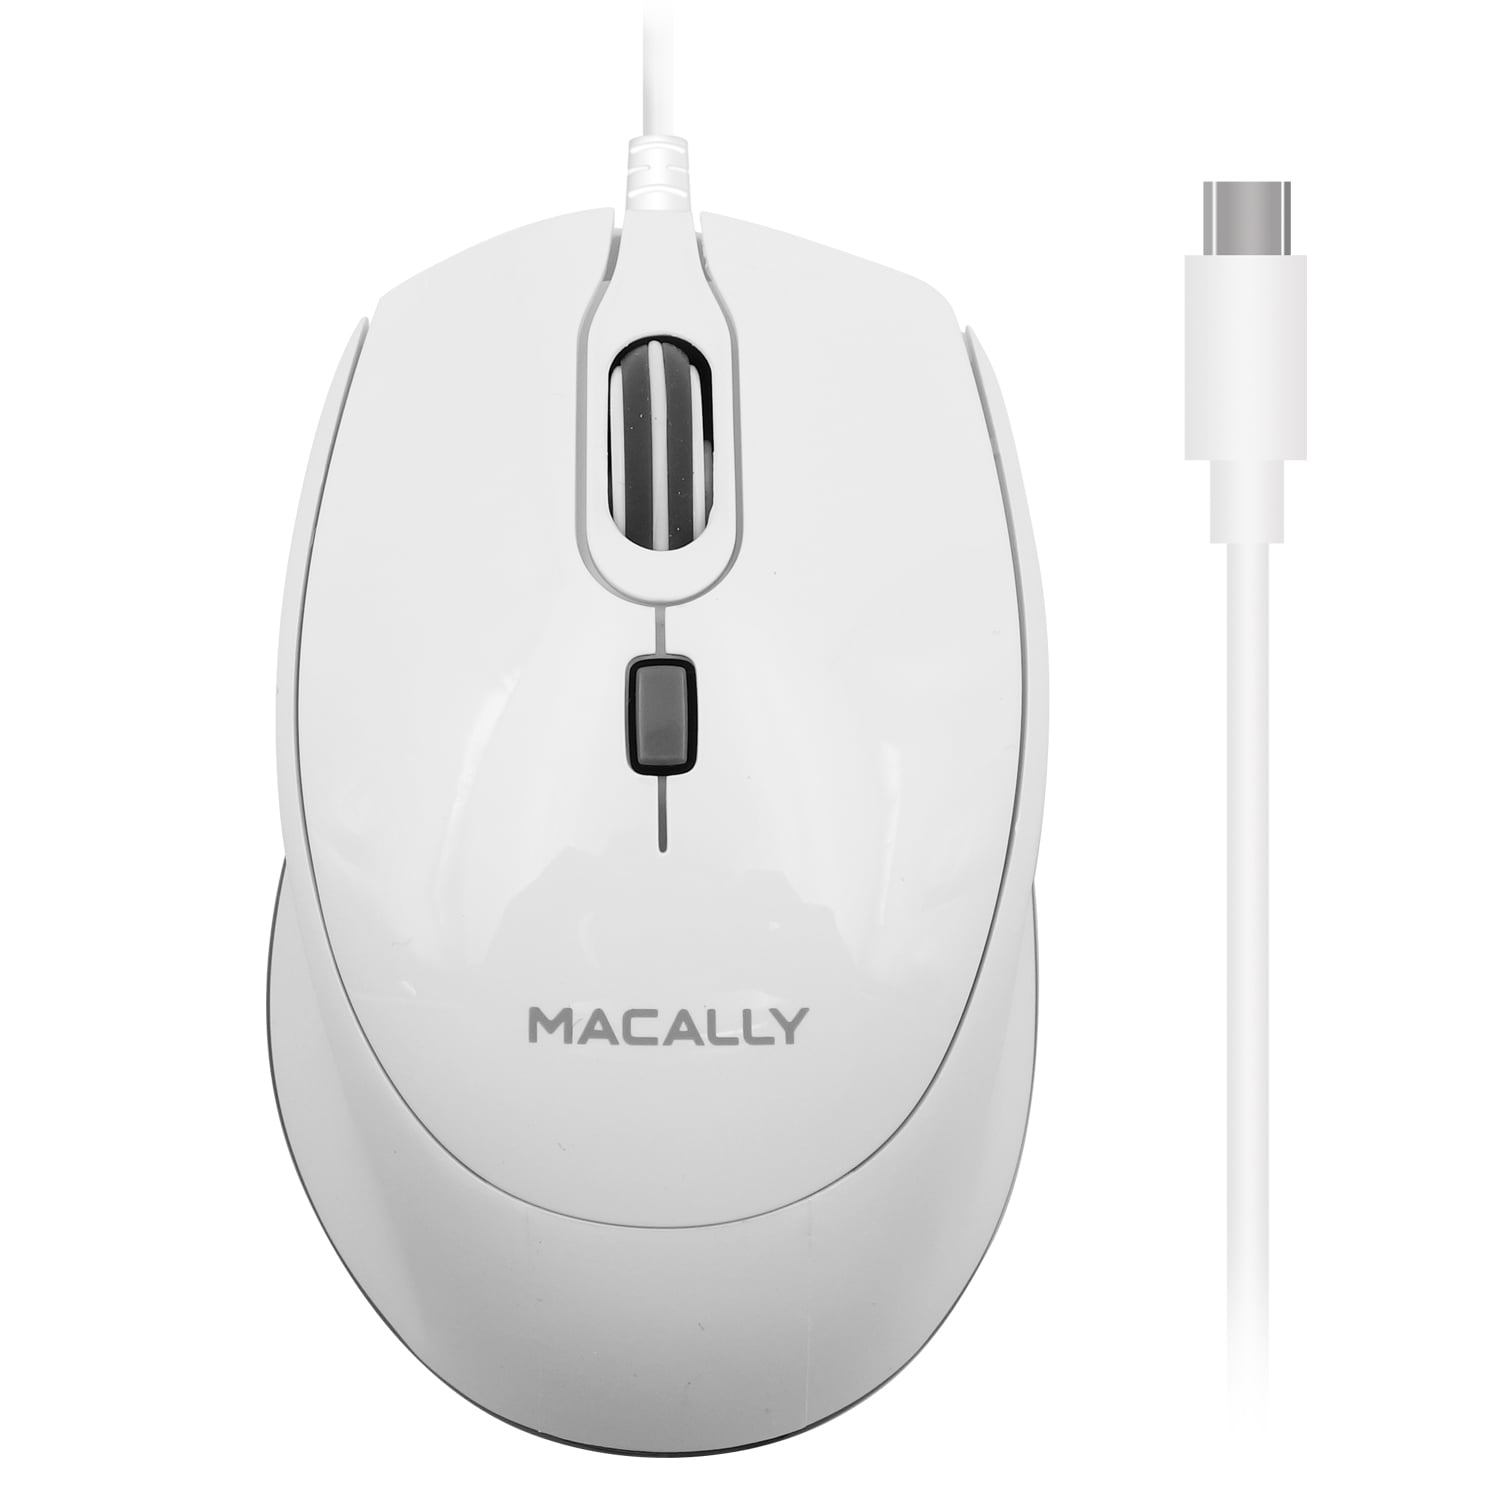 Macally Macally USB C Mouse for Mac - Precise and Comfortable - Wired Type C Mouse for Pro Air|PC|iOS|Android - Ambidextrous Body, Multiple DPI Modes, and 5ft Cable - Plug and